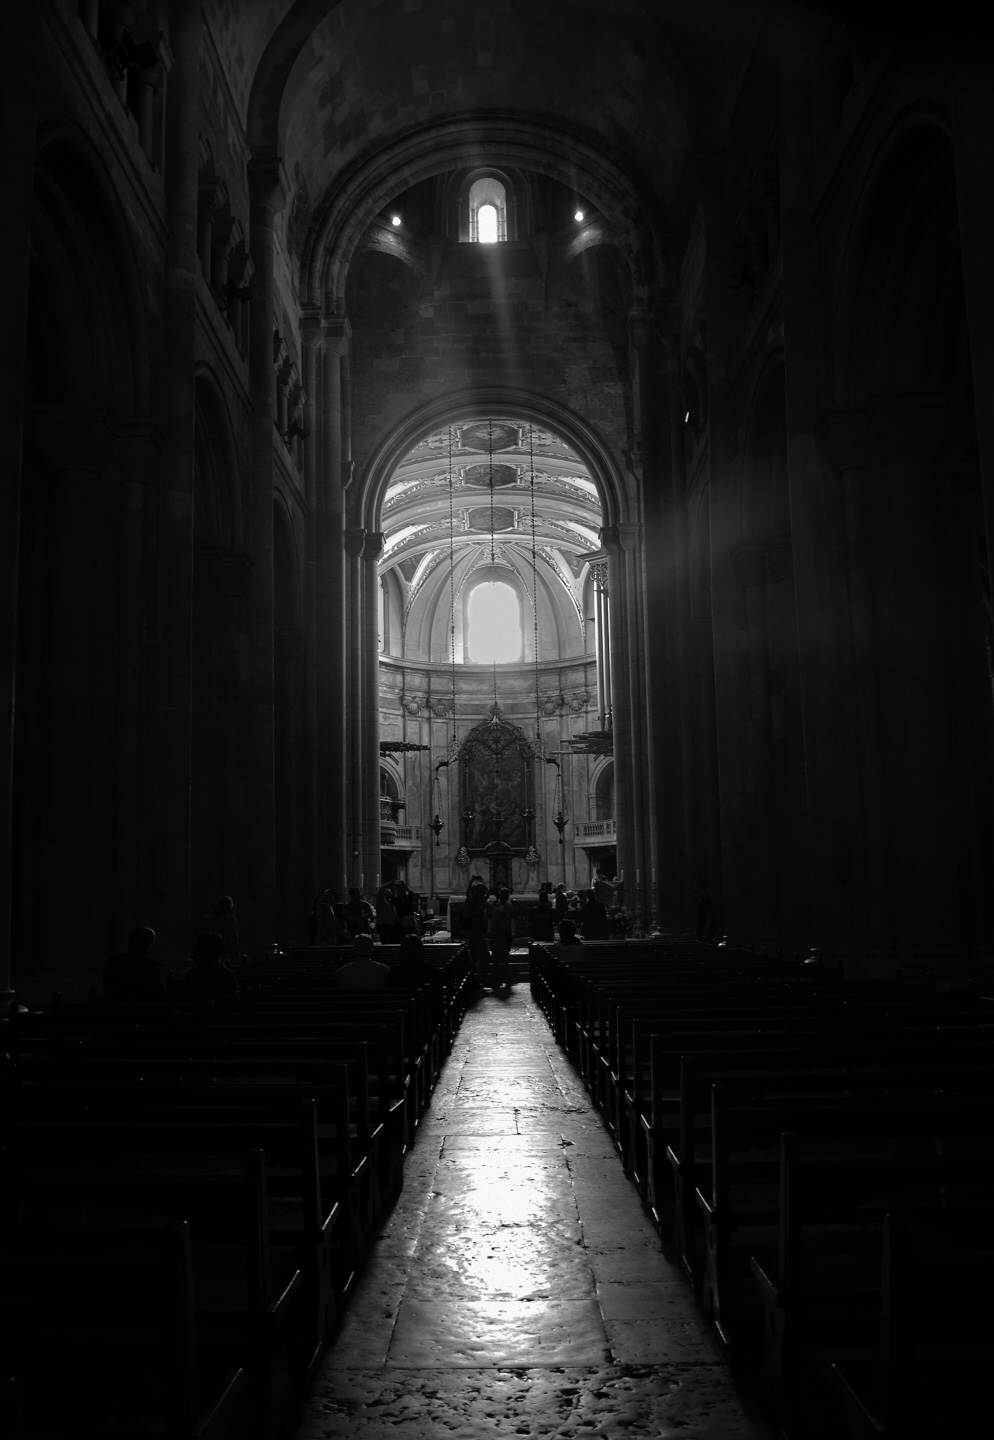 A dark view of a church interior, with pews on either side and the altar straight ahead.